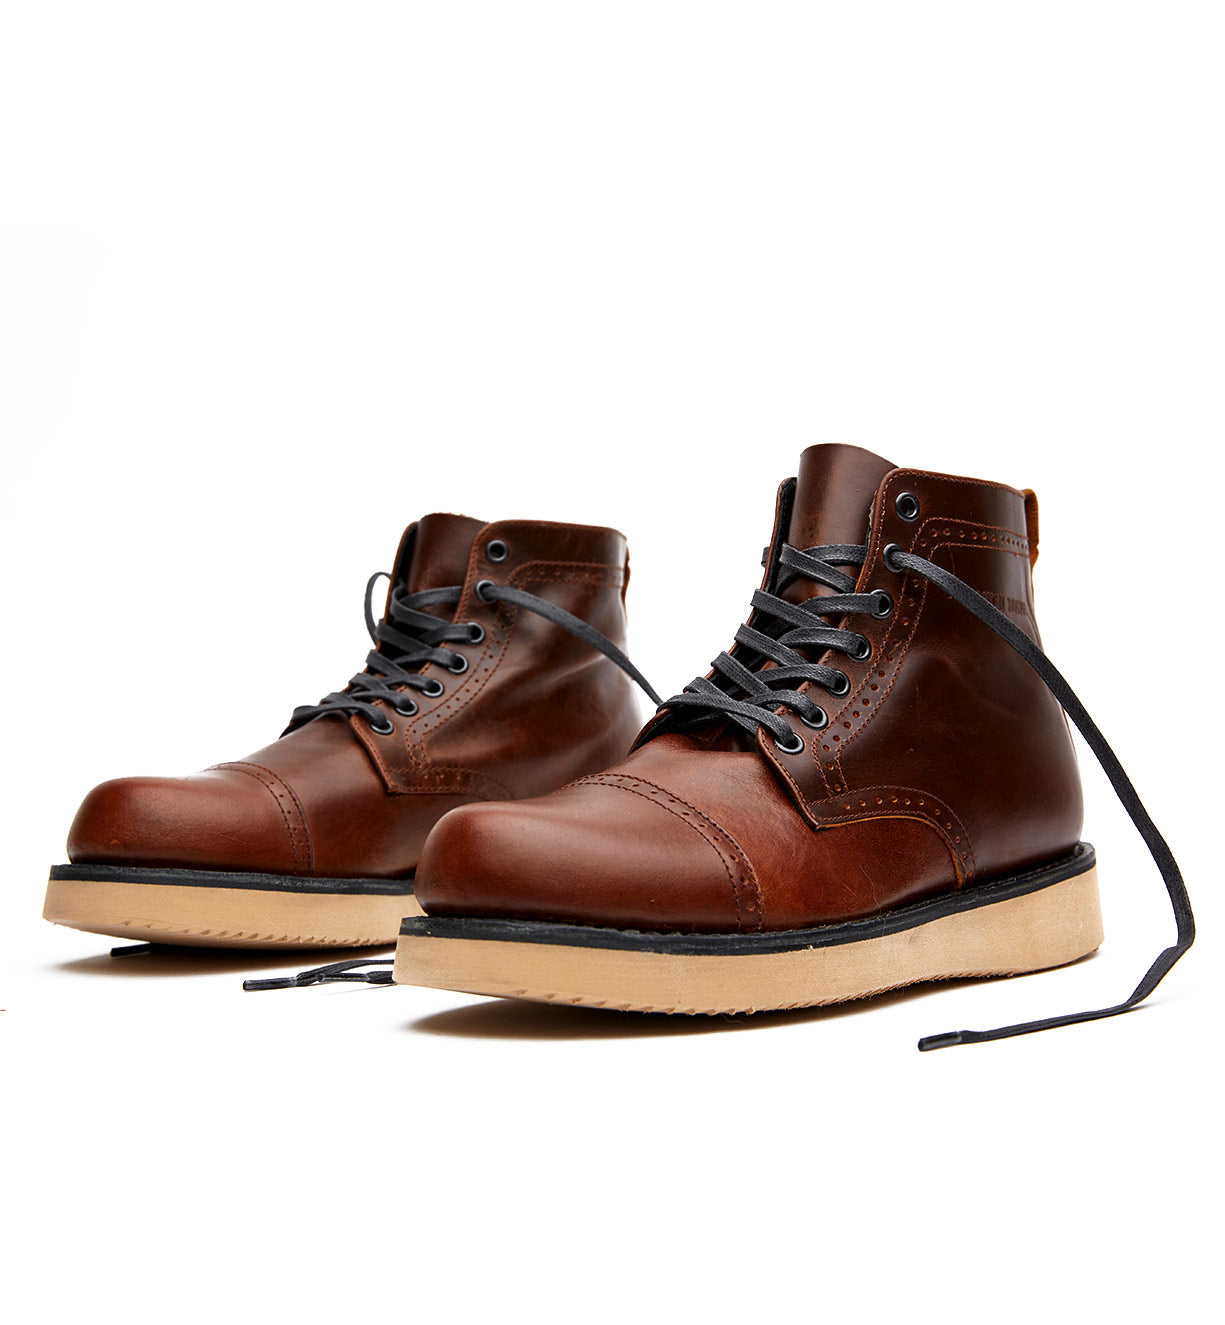 A pair of brown leather Broken Homme Shaun boots on a white background with a goodyear welt.